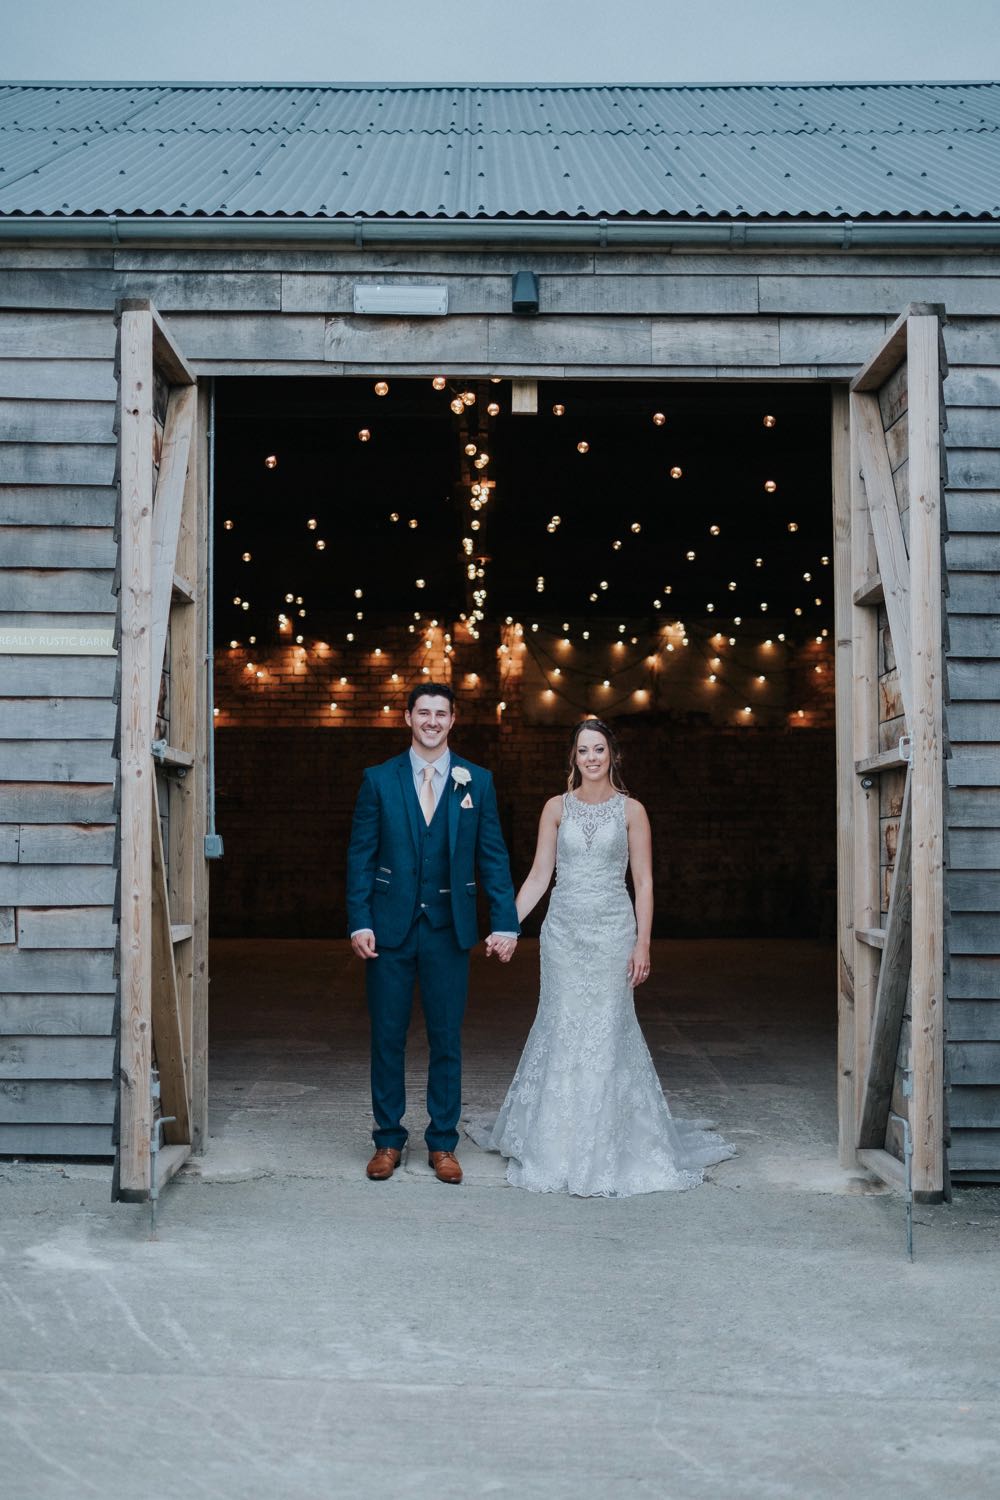 This picture is taken outside the really rustic barn. In the foreground facing the camera you can see the bride and groom. She is wearing a white, sleeveless  gown with a high neck and lace details. The groom is wearing  a dark suit, white shirt and light coloured tie. He has a white flower in his left lapel. The couple are standing side by side holding hands with the bride on the right and the groom on the left. tThe coule are facing the camera. You can see the festoon lighting in the really rustic barn ceiling.